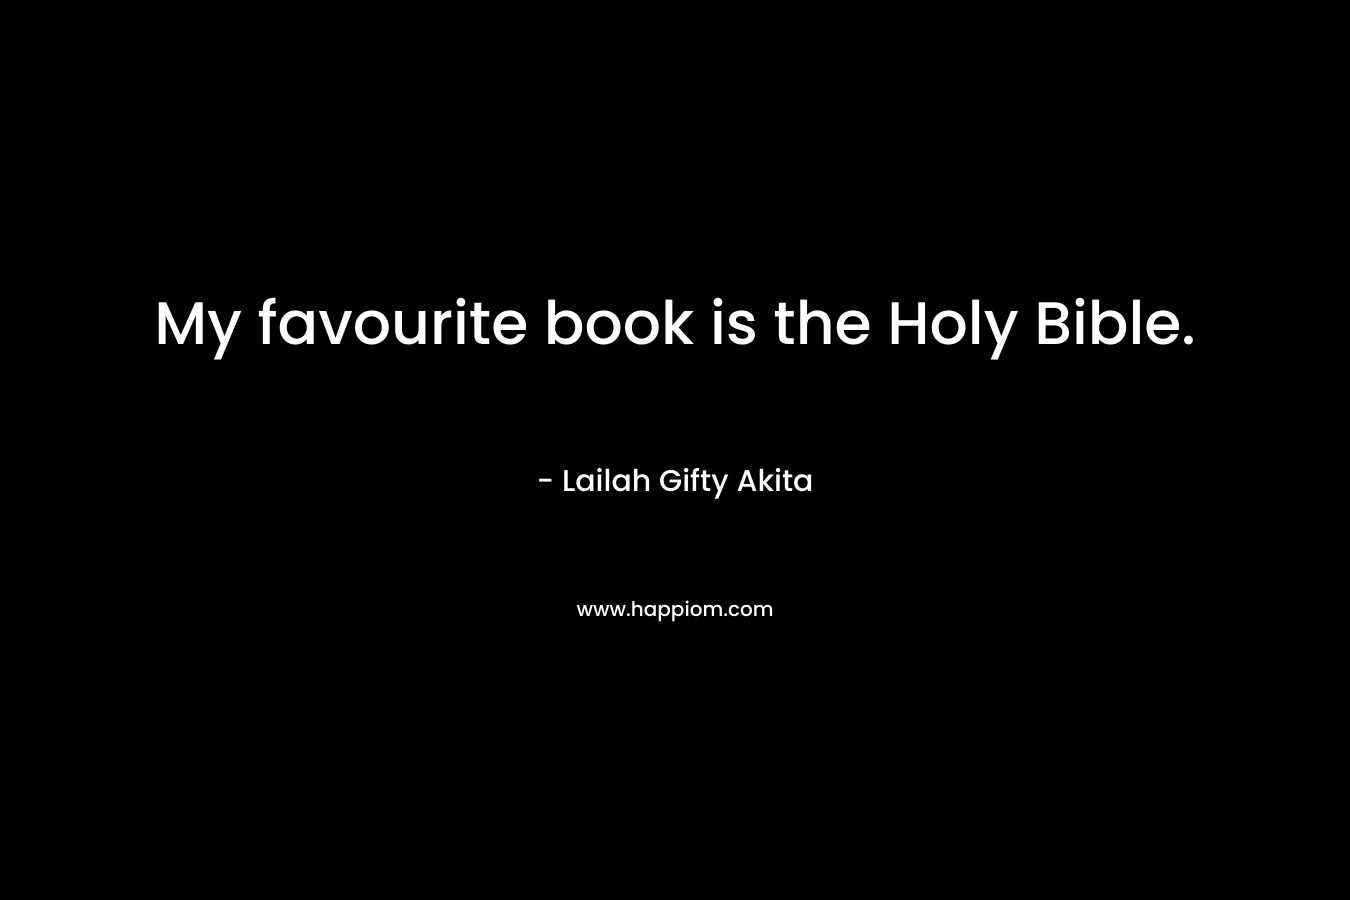 My favourite book is the Holy Bible.